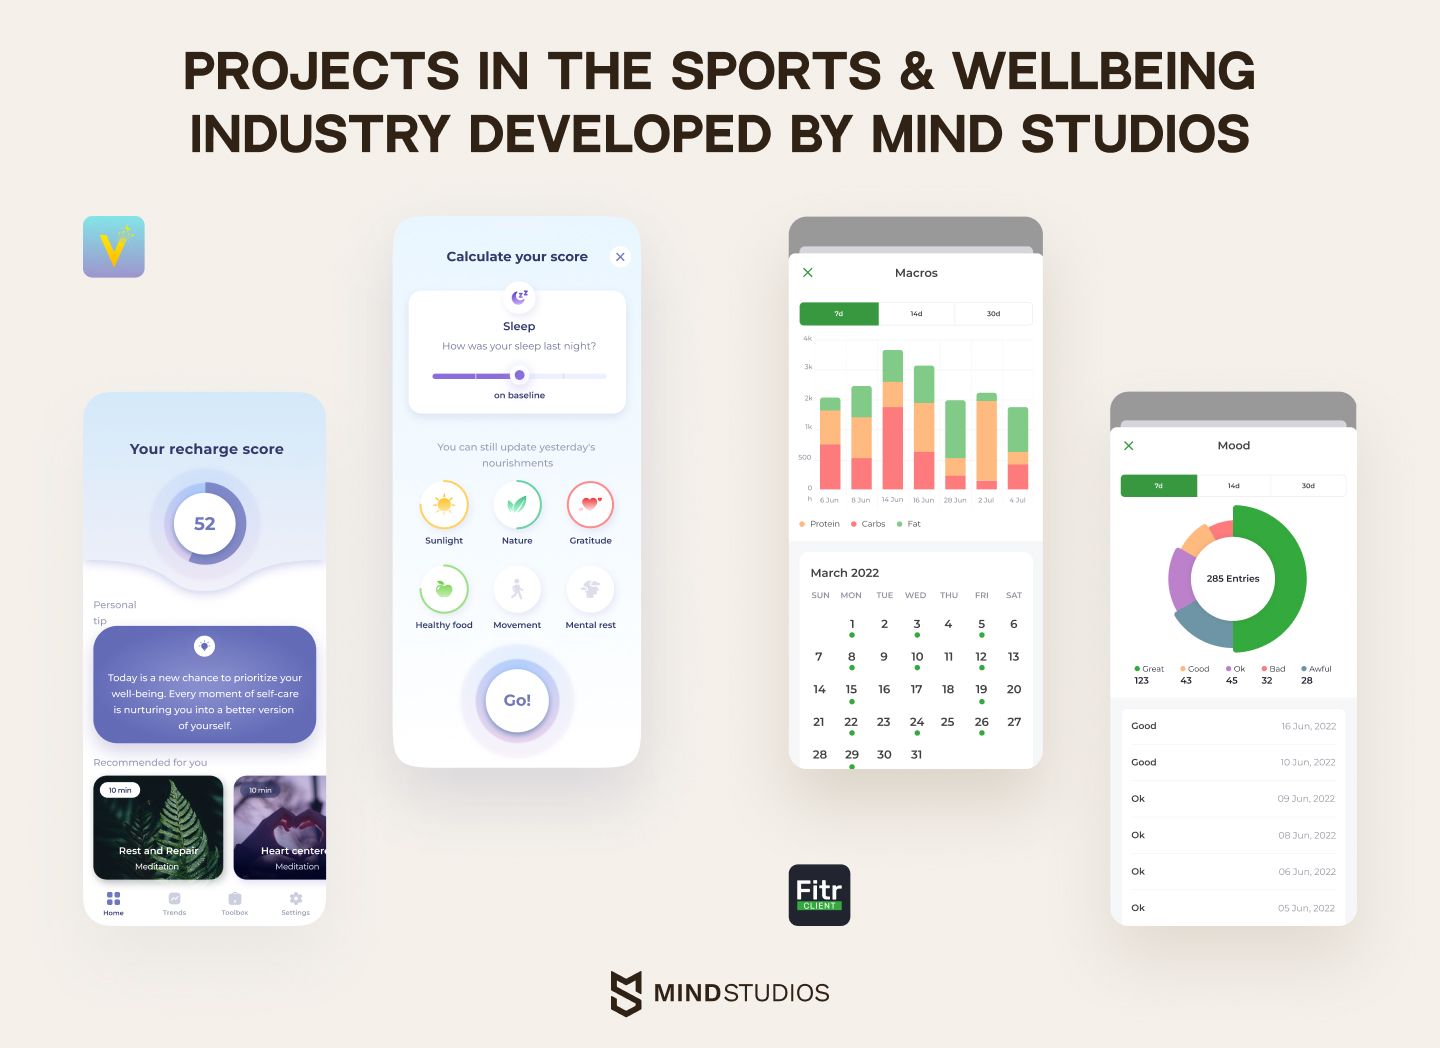 Projects in the sports & wellbeing industry developed by Mind Studios